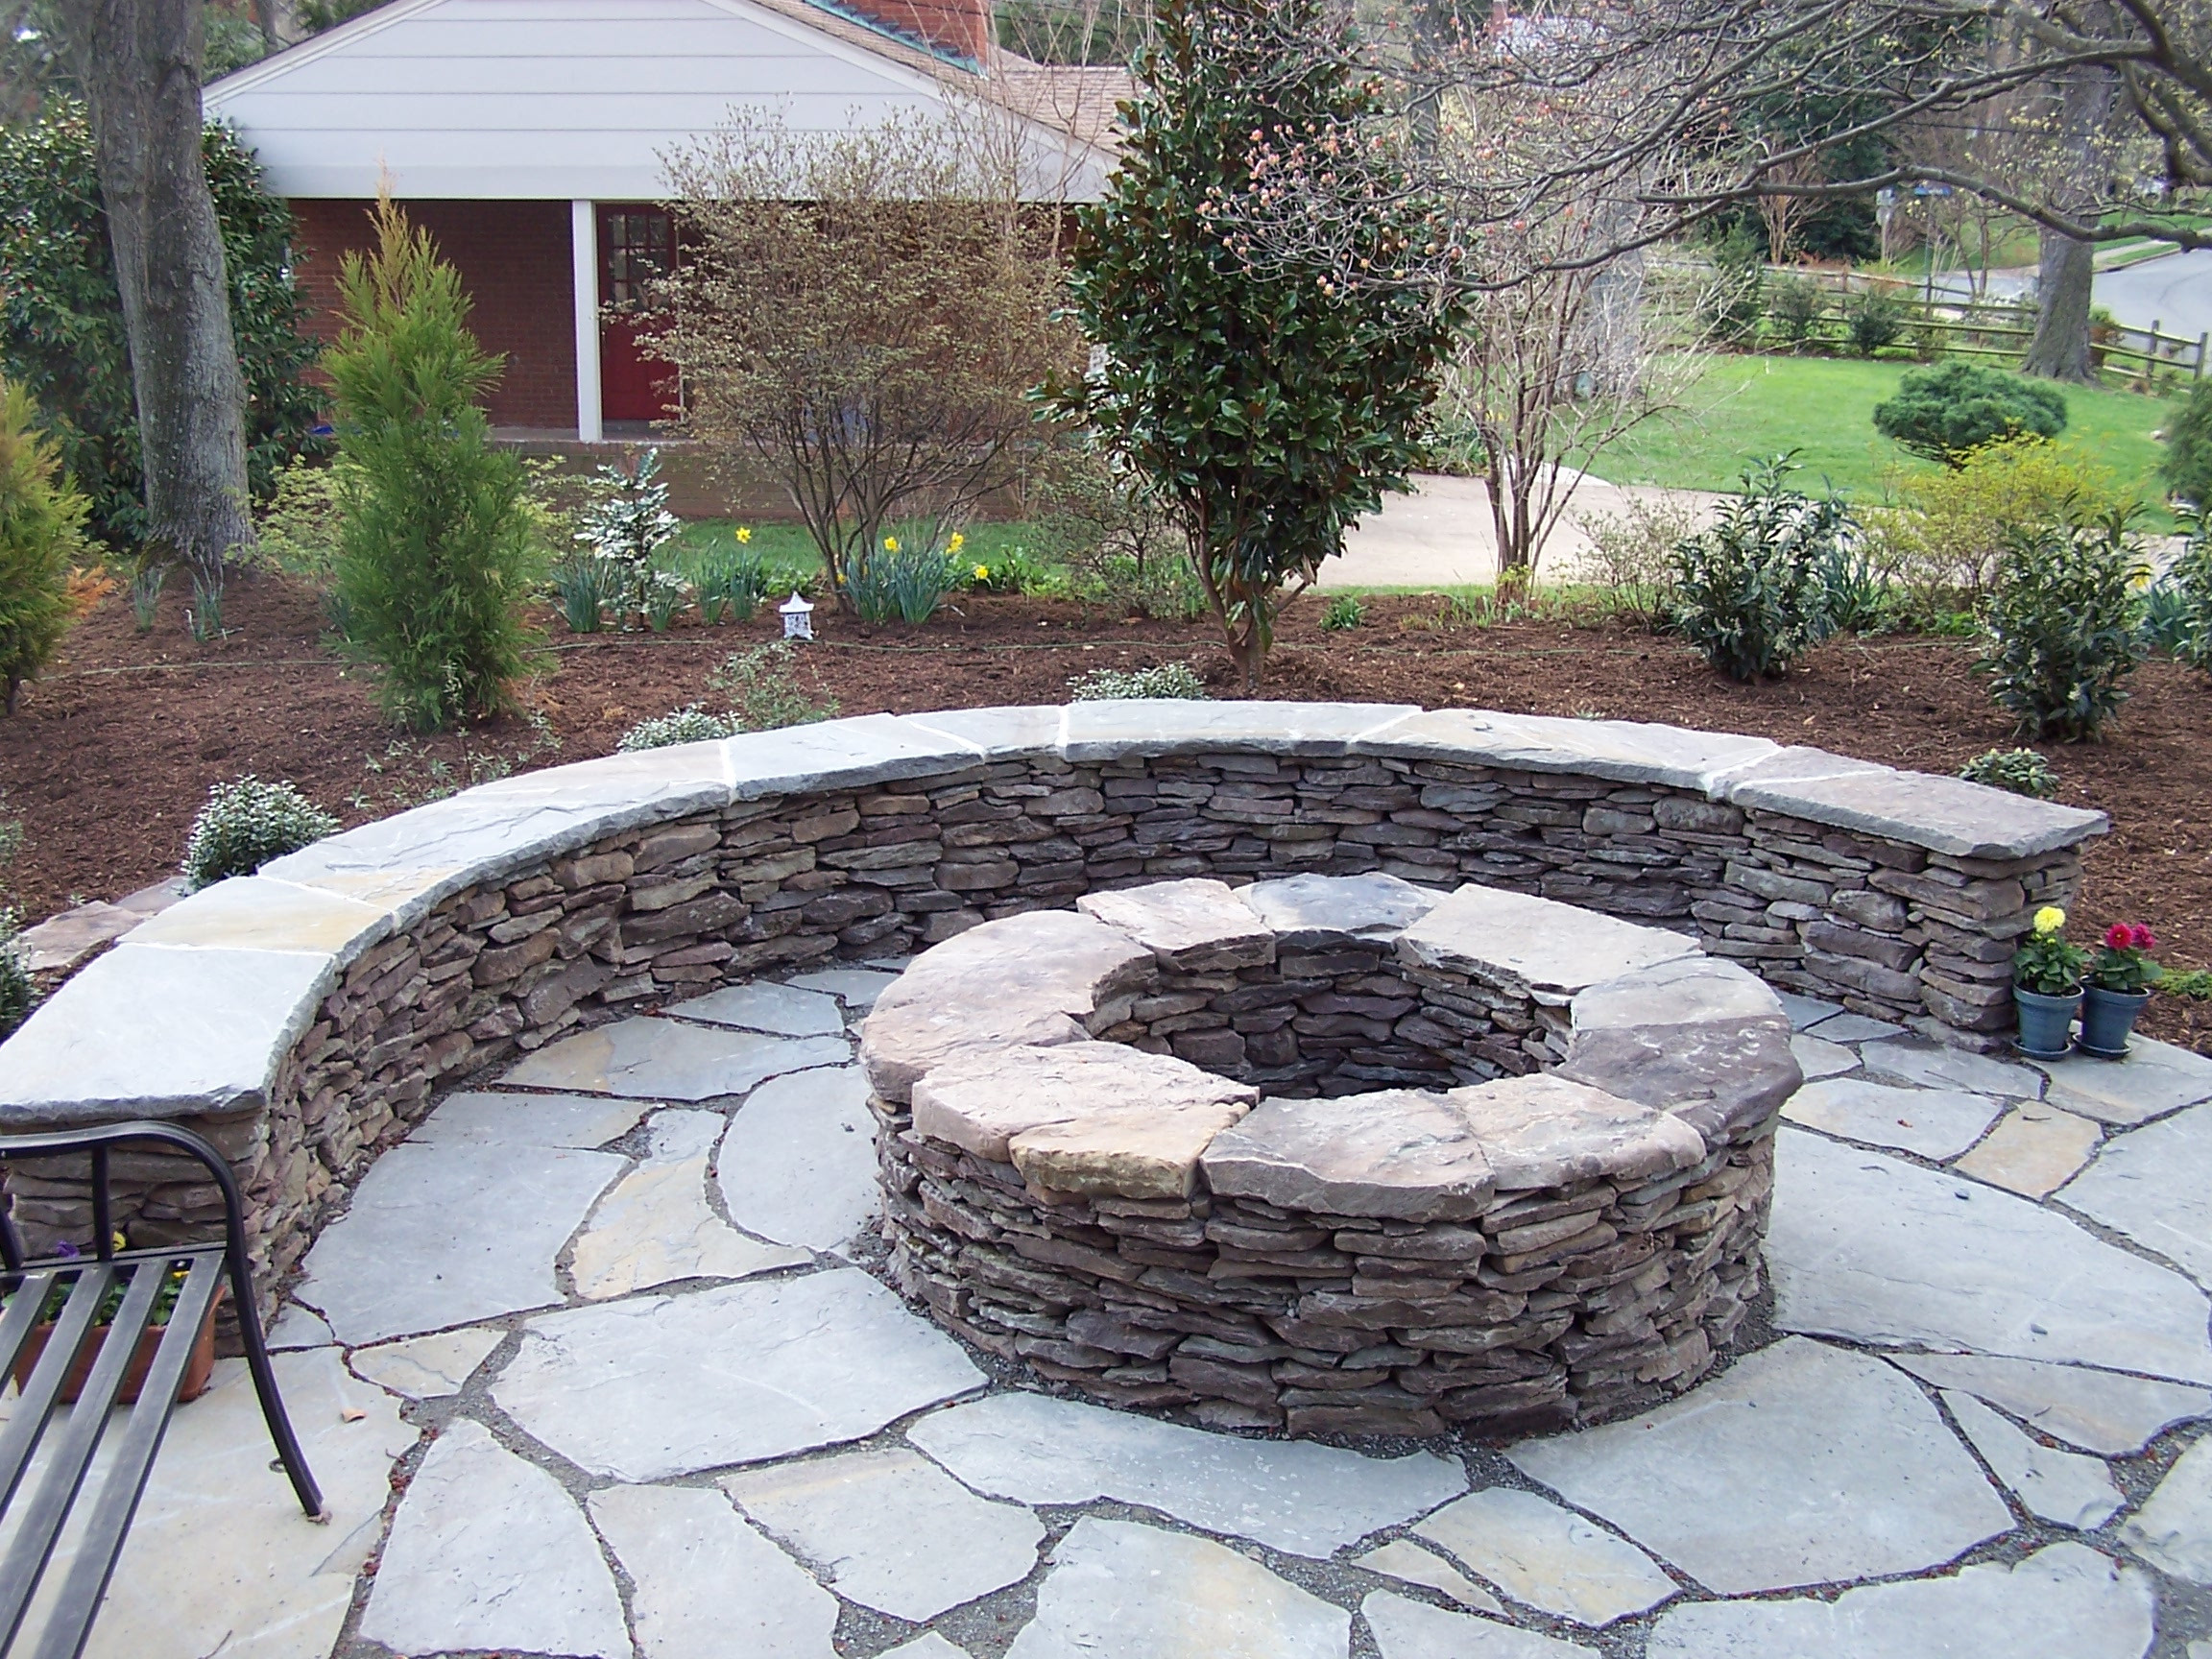 Stone Patio With Fire Pit
 The Back Yard Fire Pit